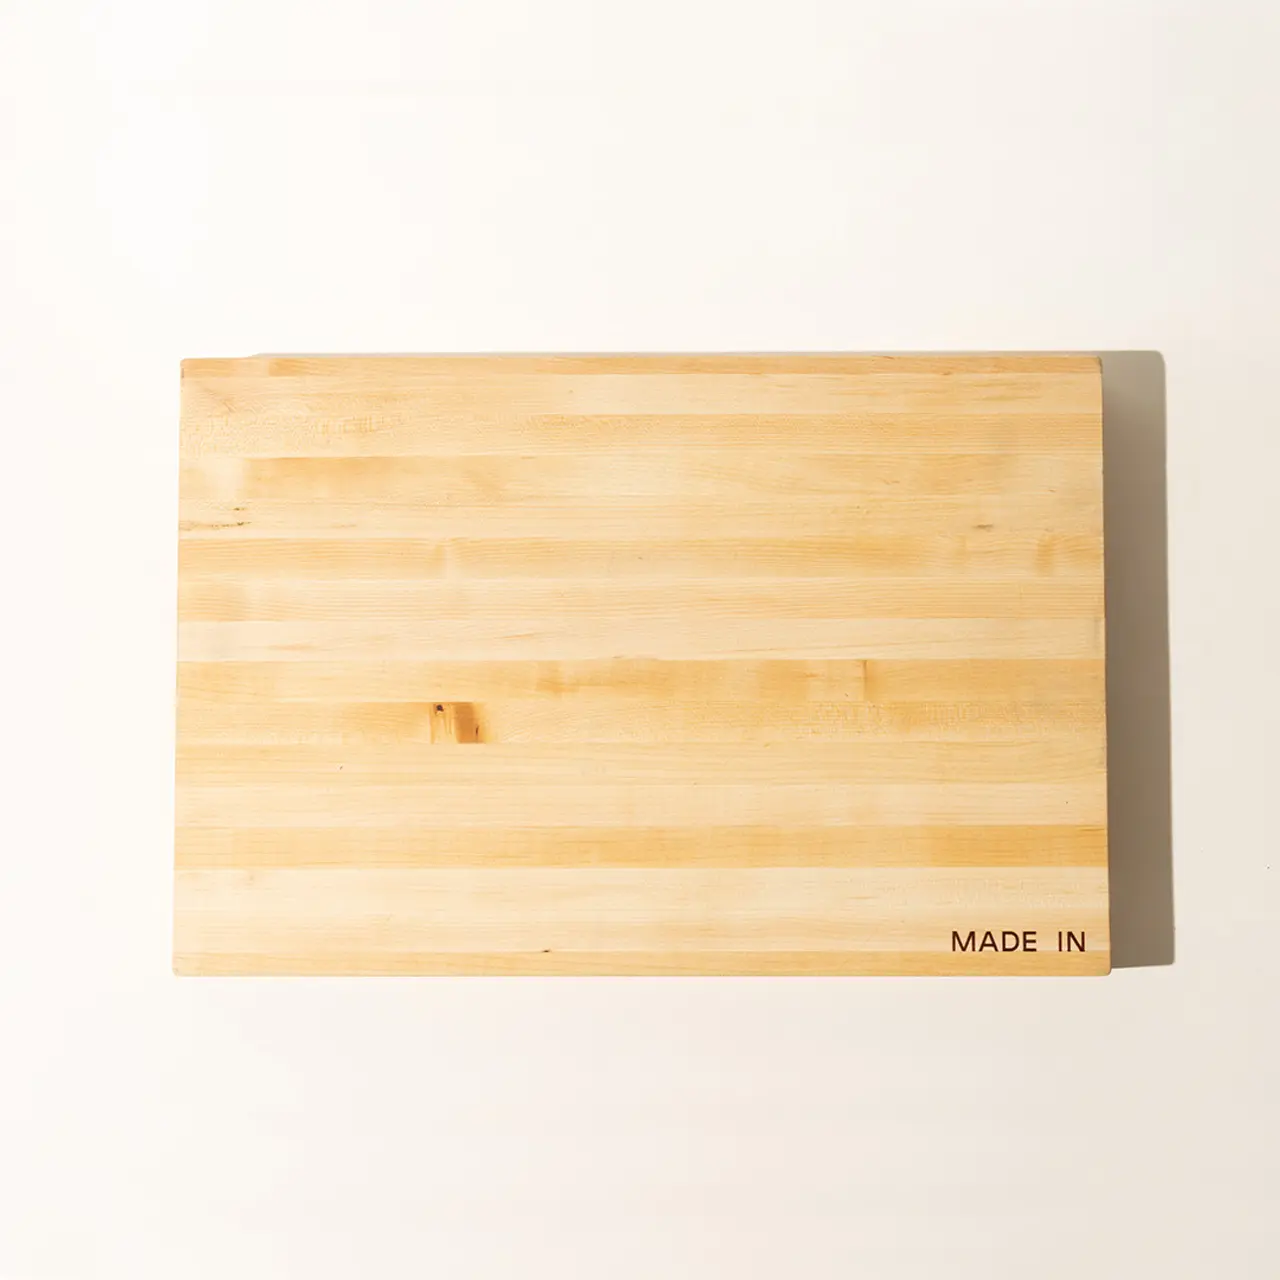 A rectangular bamboo cutting board with the text "MADE IN" stamped in the lower right corner, on a white background.